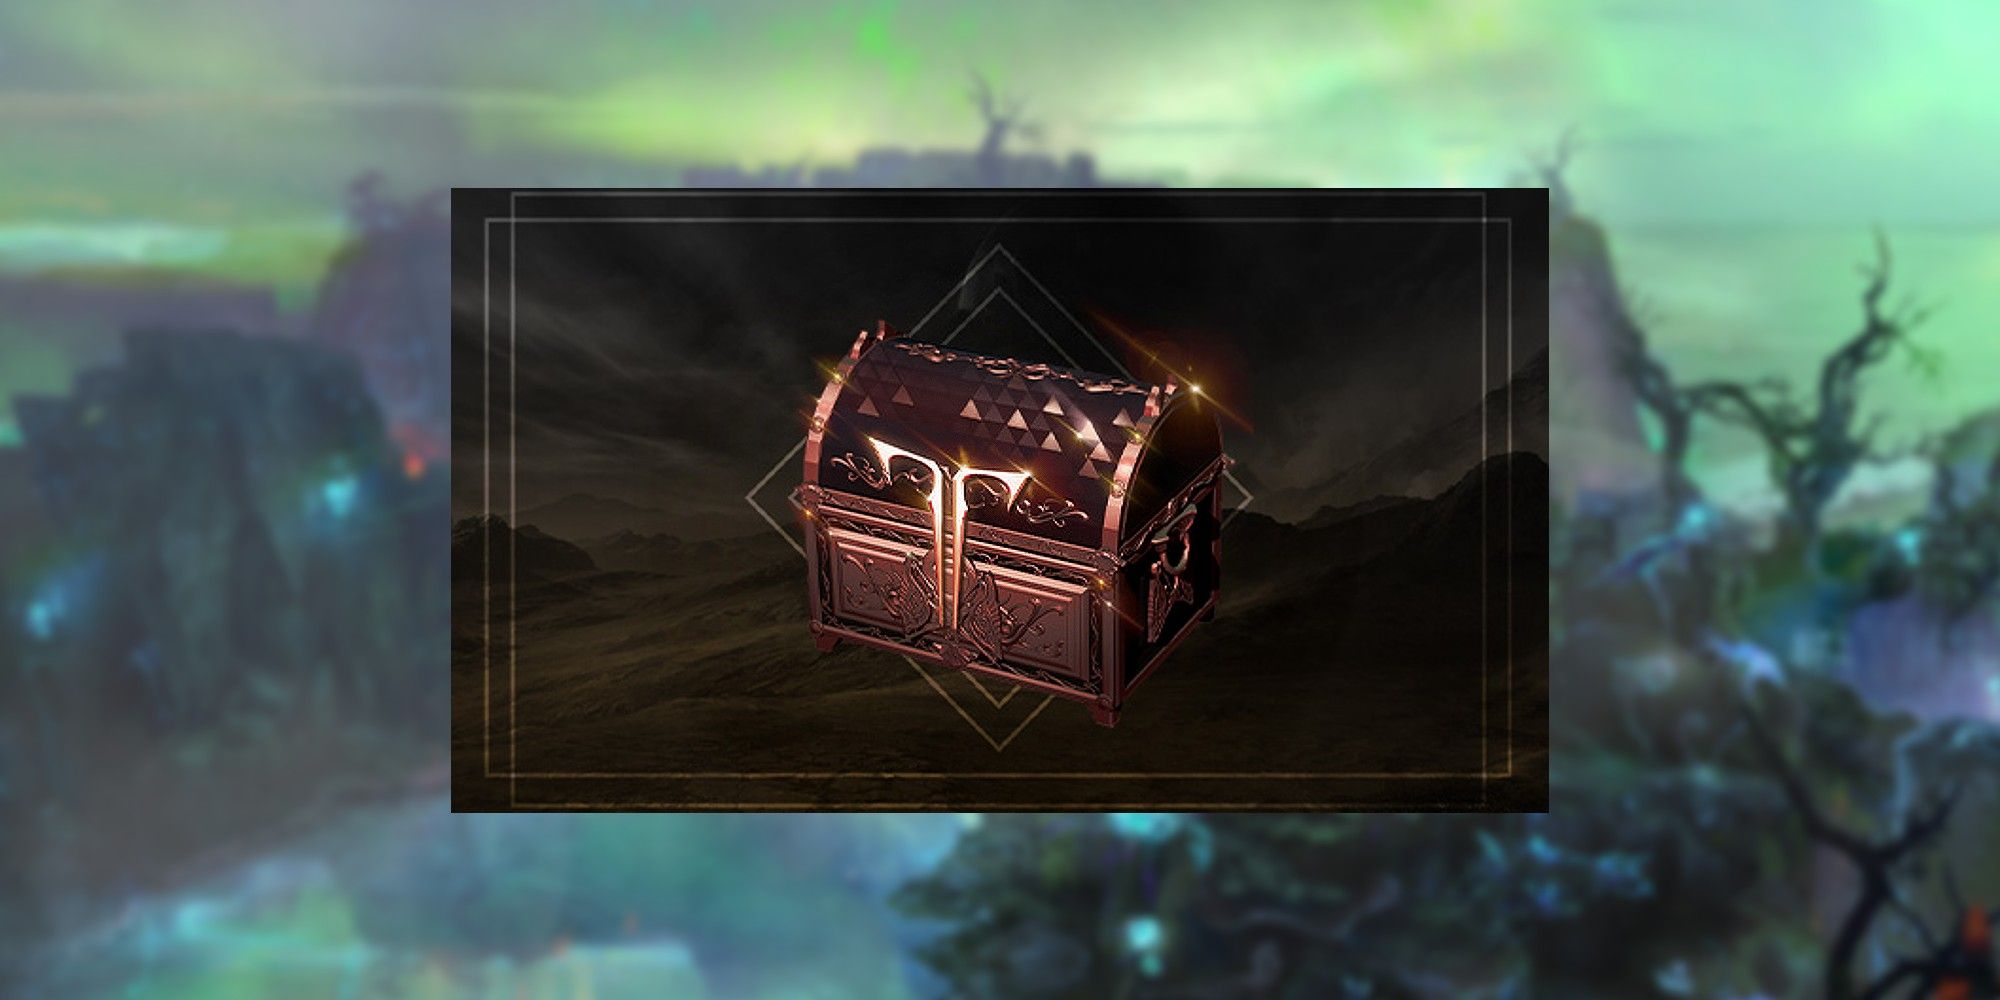 Lost Ark Bronze Founder's Pack